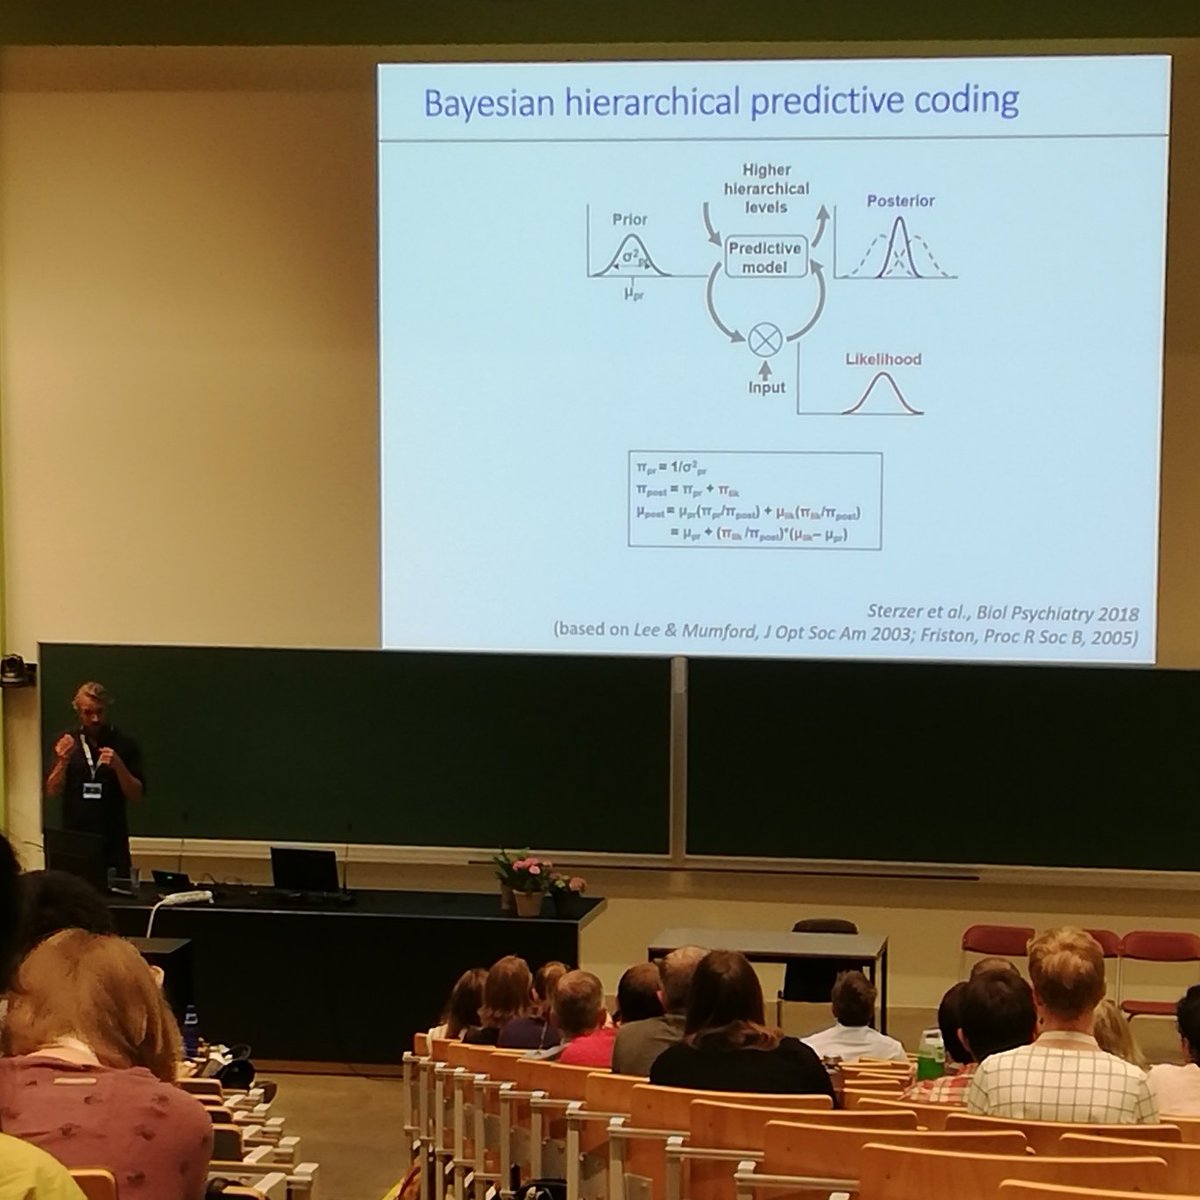 It was enlightening and inspiring to hear all the great presentations of #ECVP2019 in #Leuven, especially the talk from @weilnhammer, and the whole symposia about #predictivecoding account of #ASD and #Schizophrenia by @beckyneuro @flodlan and #PhilippSterzer.